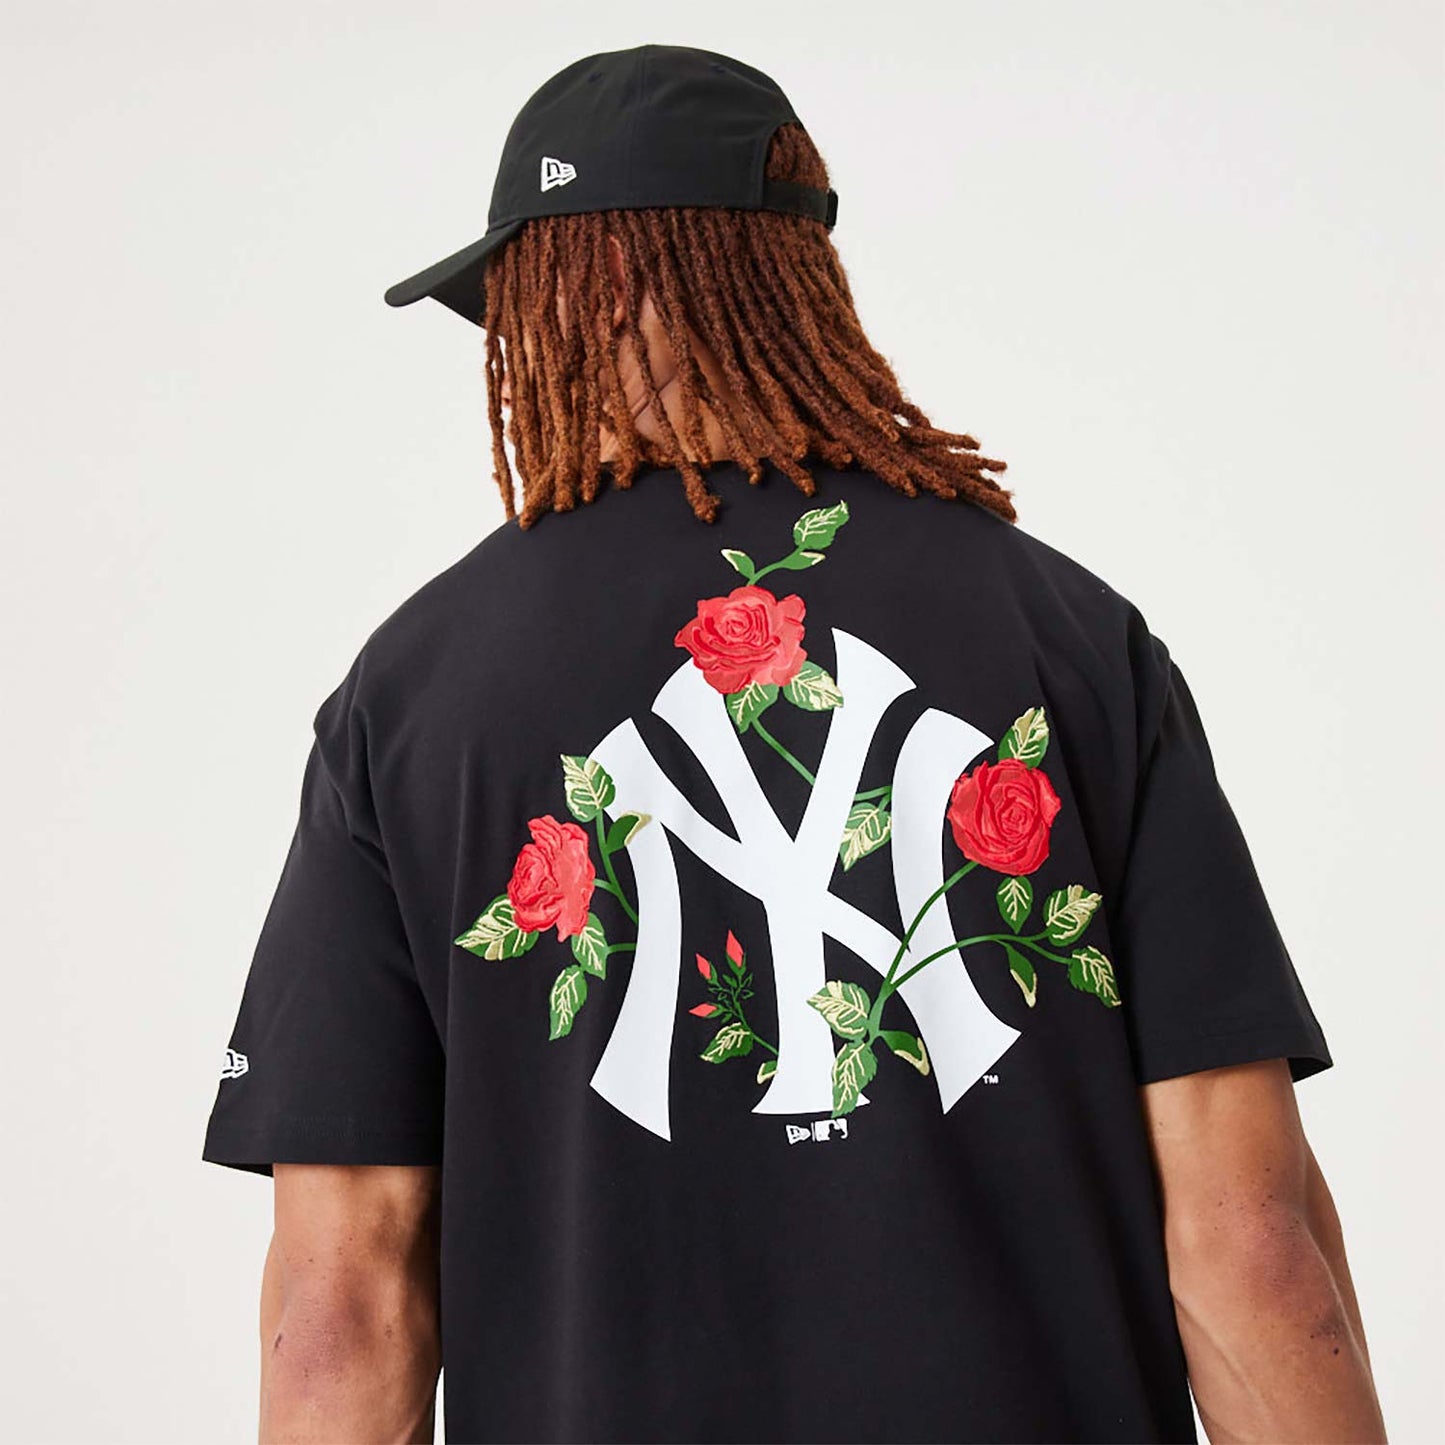 NEW ERA NY YANKEES MLB FLORAL GRAPHIC OVER-SIZED TEE